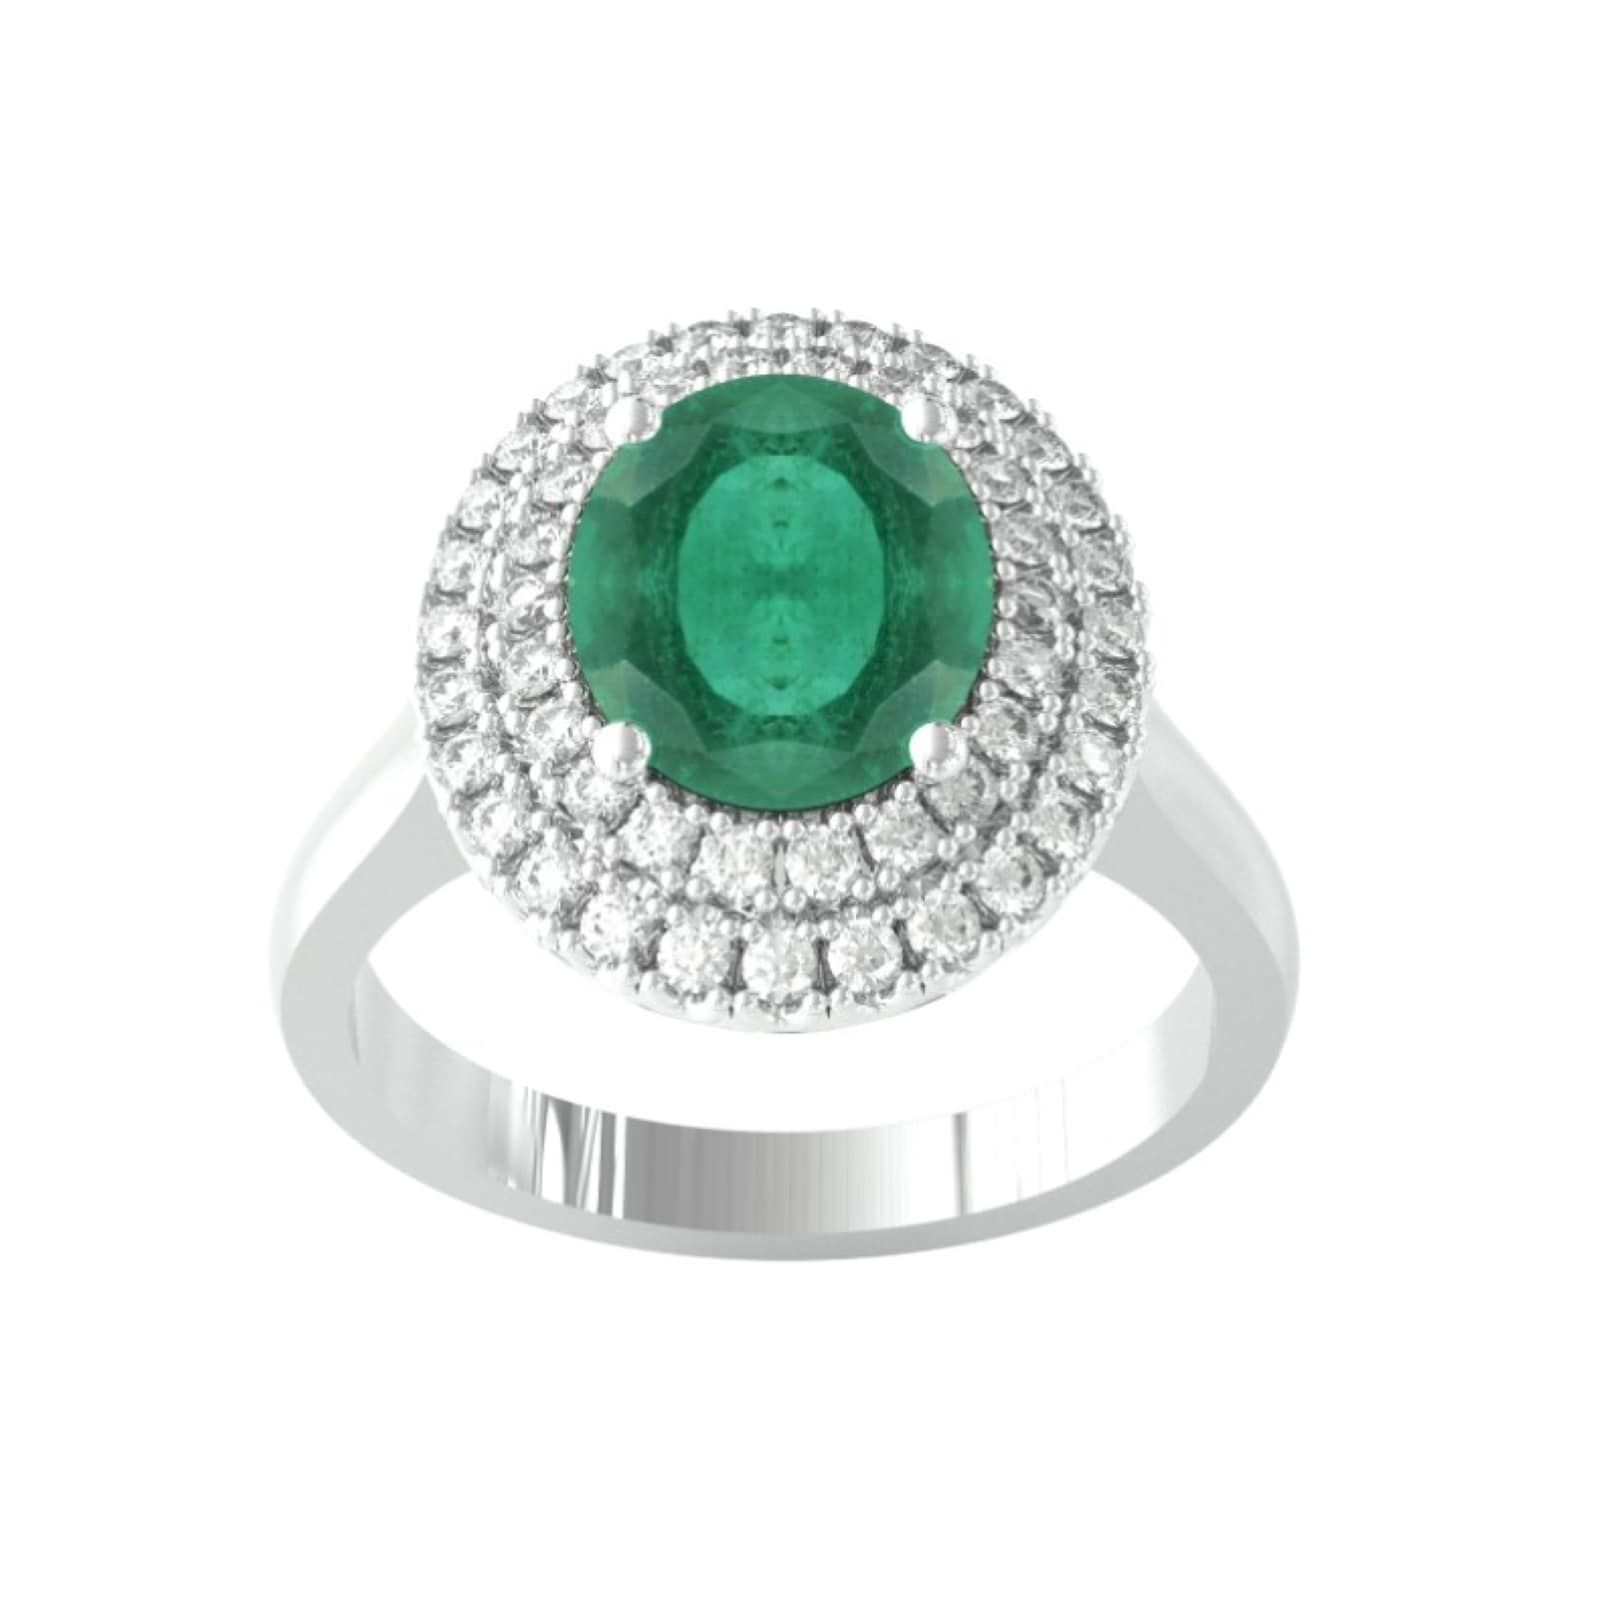 18ct White Gold Emerald & Diamond Double Halo Cluster Ring - Ring Size M.5